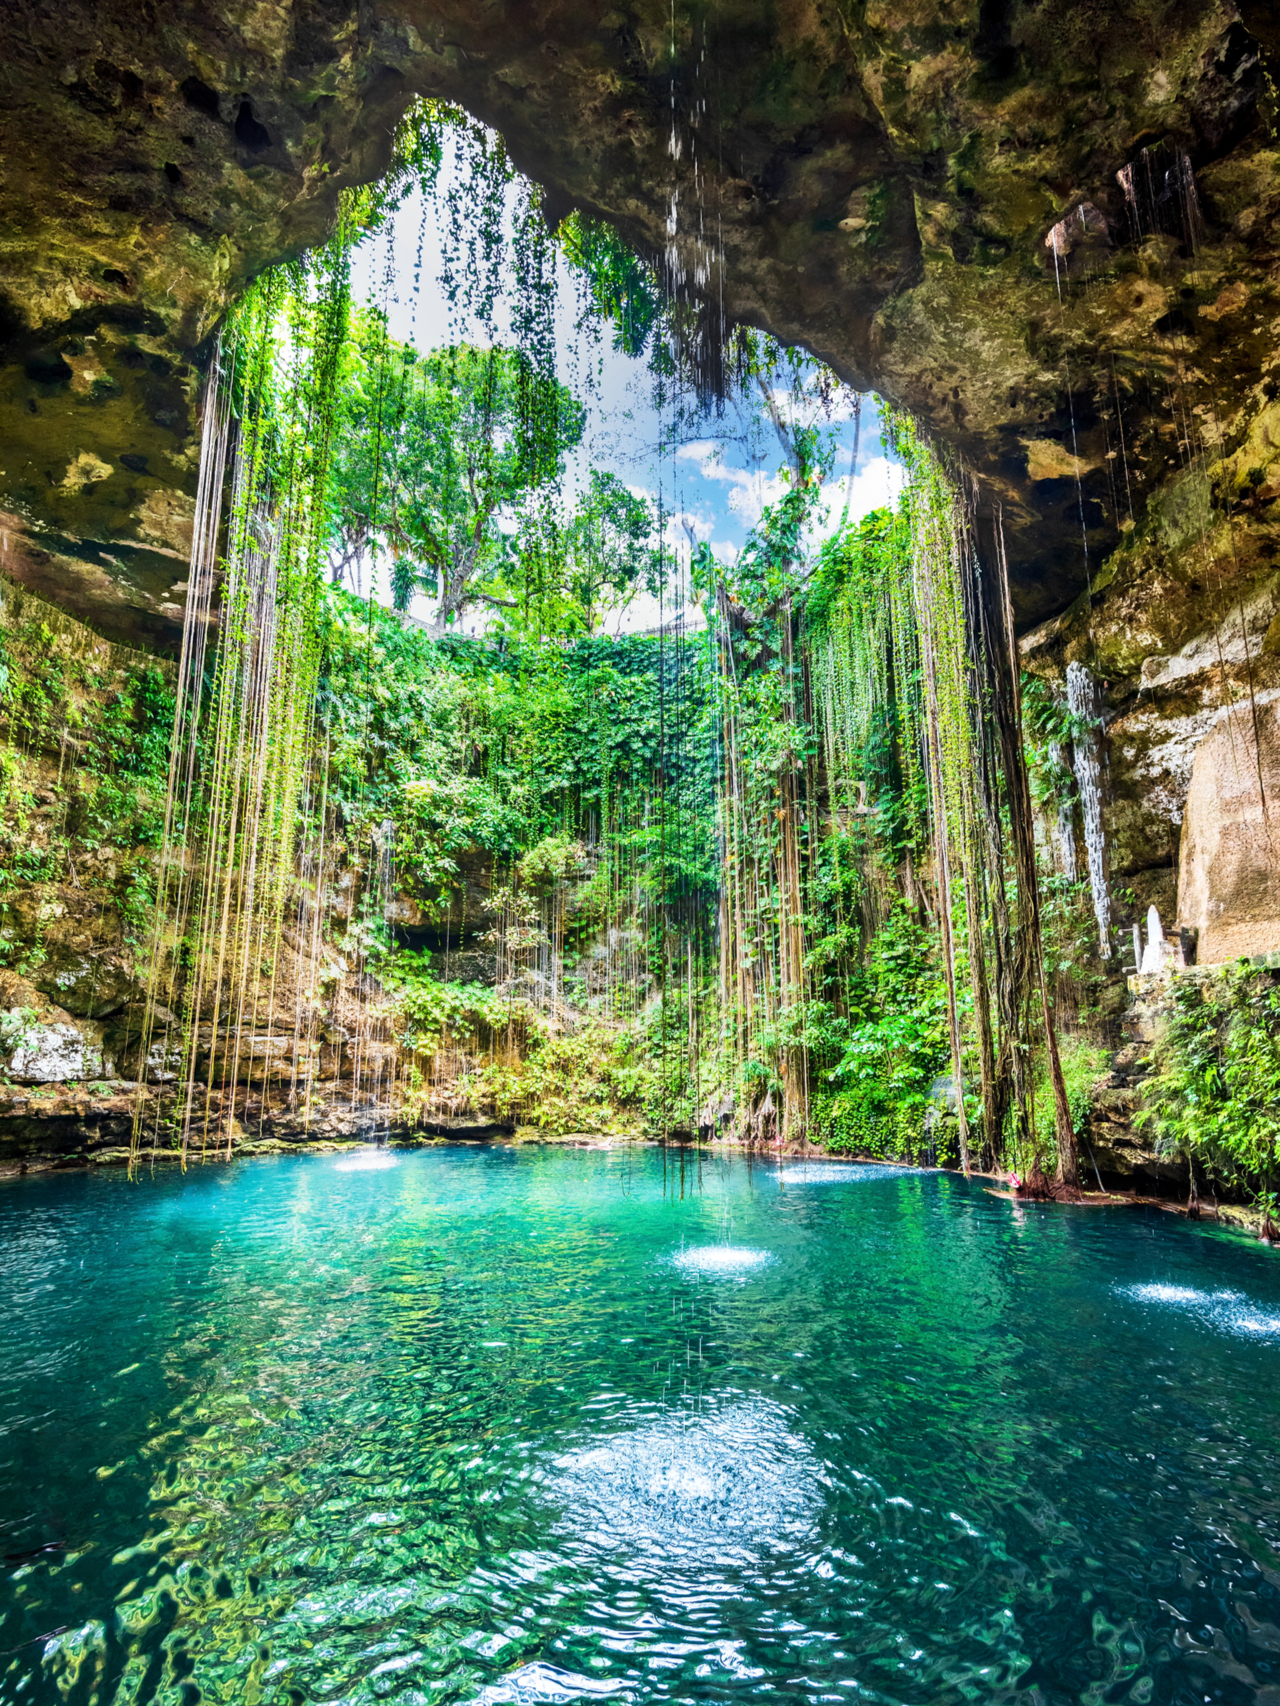 10 Amazing Places to Visit in Mexico